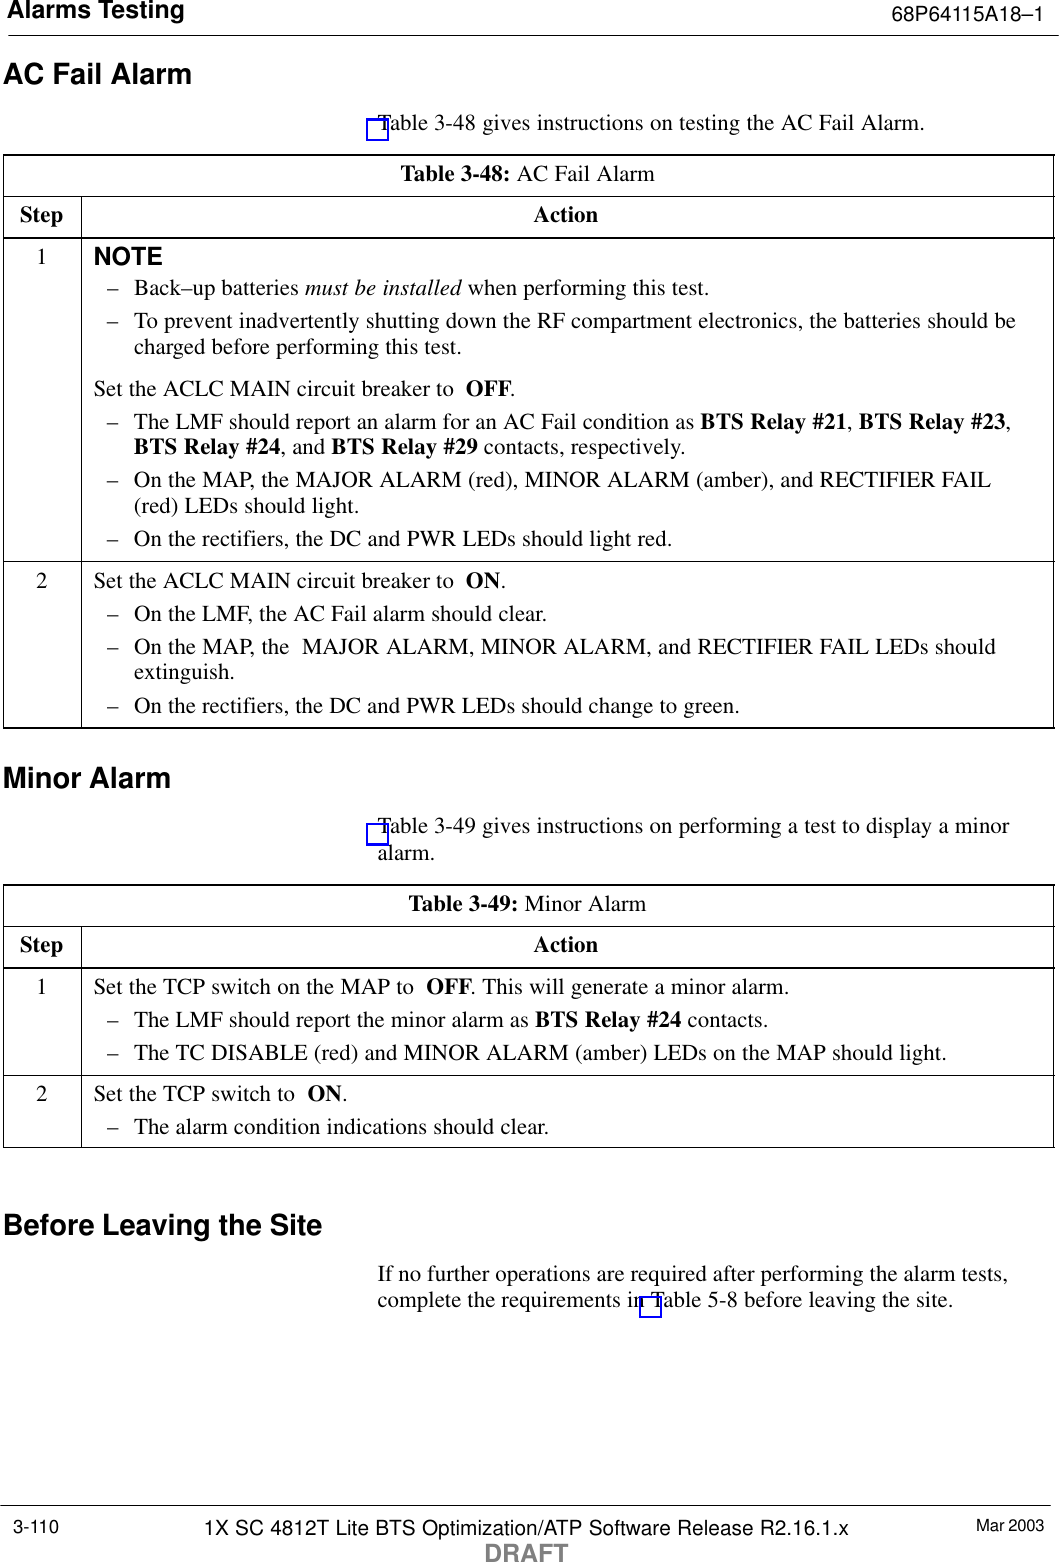 Alarms Testing 68P64115A18–1Mar 20031X SC 4812T Lite BTS Optimization/ATP Software Release R2.16.1.xDRAFT3-110AC Fail AlarmTable 3-48 gives instructions on testing the AC Fail Alarm.Table 3-48: AC Fail AlarmStep Action1NOTE– Back–up batteries must be installed when performing this test.– To prevent inadvertently shutting down the RF compartment electronics, the batteries should becharged before performing this test.Set the ACLC MAIN circuit breaker to  OFF.– The LMF should report an alarm for an AC Fail condition as BTS Relay #21, BTS Relay #23,BTS Relay #24, and BTS Relay #29 contacts, respectively.– On the MAP, the MAJOR ALARM (red), MINOR ALARM (amber), and RECTIFIER FAIL(red) LEDs should light.– On the rectifiers, the DC and PWR LEDs should light red.2Set the ACLC MAIN circuit breaker to  ON.– On the LMF, the AC Fail alarm should clear.– On the MAP, the  MAJOR ALARM, MINOR ALARM, and RECTIFIER FAIL LEDs shouldextinguish.– On the rectifiers, the DC and PWR LEDs should change to green.Minor AlarmTable 3-49 gives instructions on performing a test to display a minoralarm.Table 3-49: Minor AlarmStep Action1Set the TCP switch on the MAP to  OFF. This will generate a minor alarm.– The LMF should report the minor alarm as BTS Relay #24 contacts.– The TC DISABLE (red) and MINOR ALARM (amber) LEDs on the MAP should light.2Set the TCP switch to  ON.– The alarm condition indications should clear. Before Leaving the SiteIf no further operations are required after performing the alarm tests,complete the requirements in Table 5-8 before leaving the site.